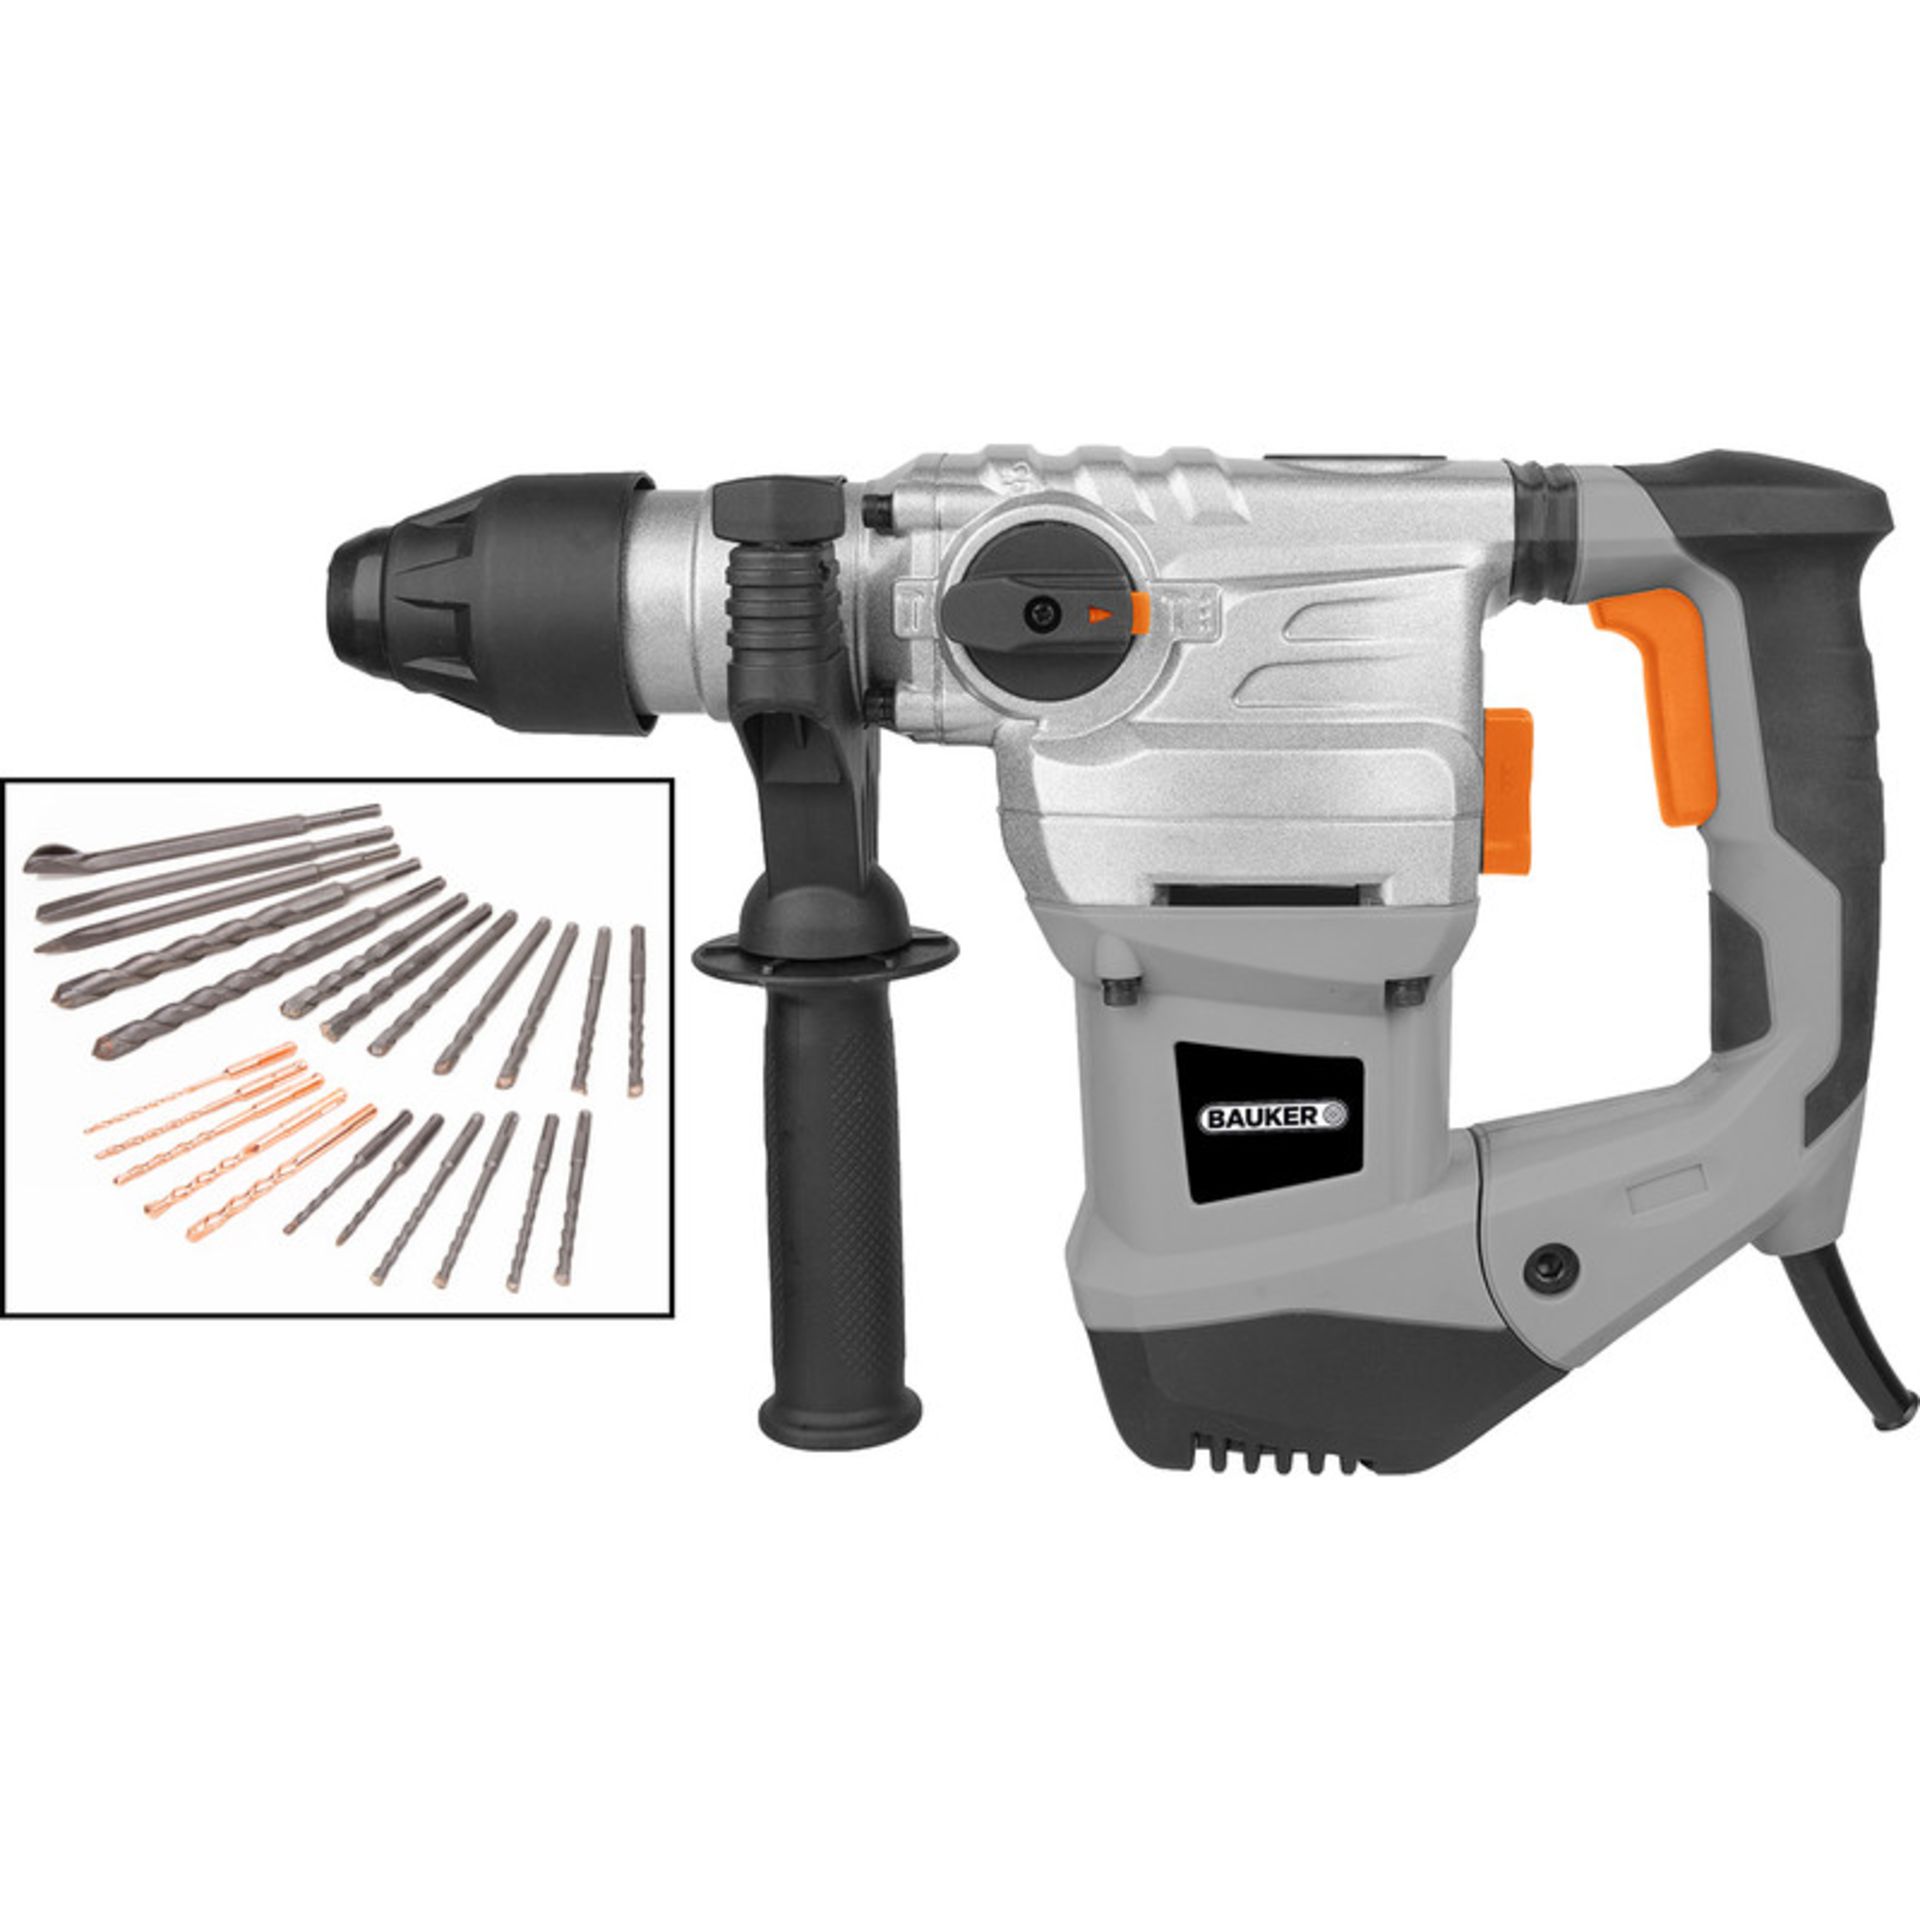 Pallet To Contain 12 x Boxed Bauker 1500W 32mm SDS Plus Rotary Hammer Drill 240V. • 3 functions: